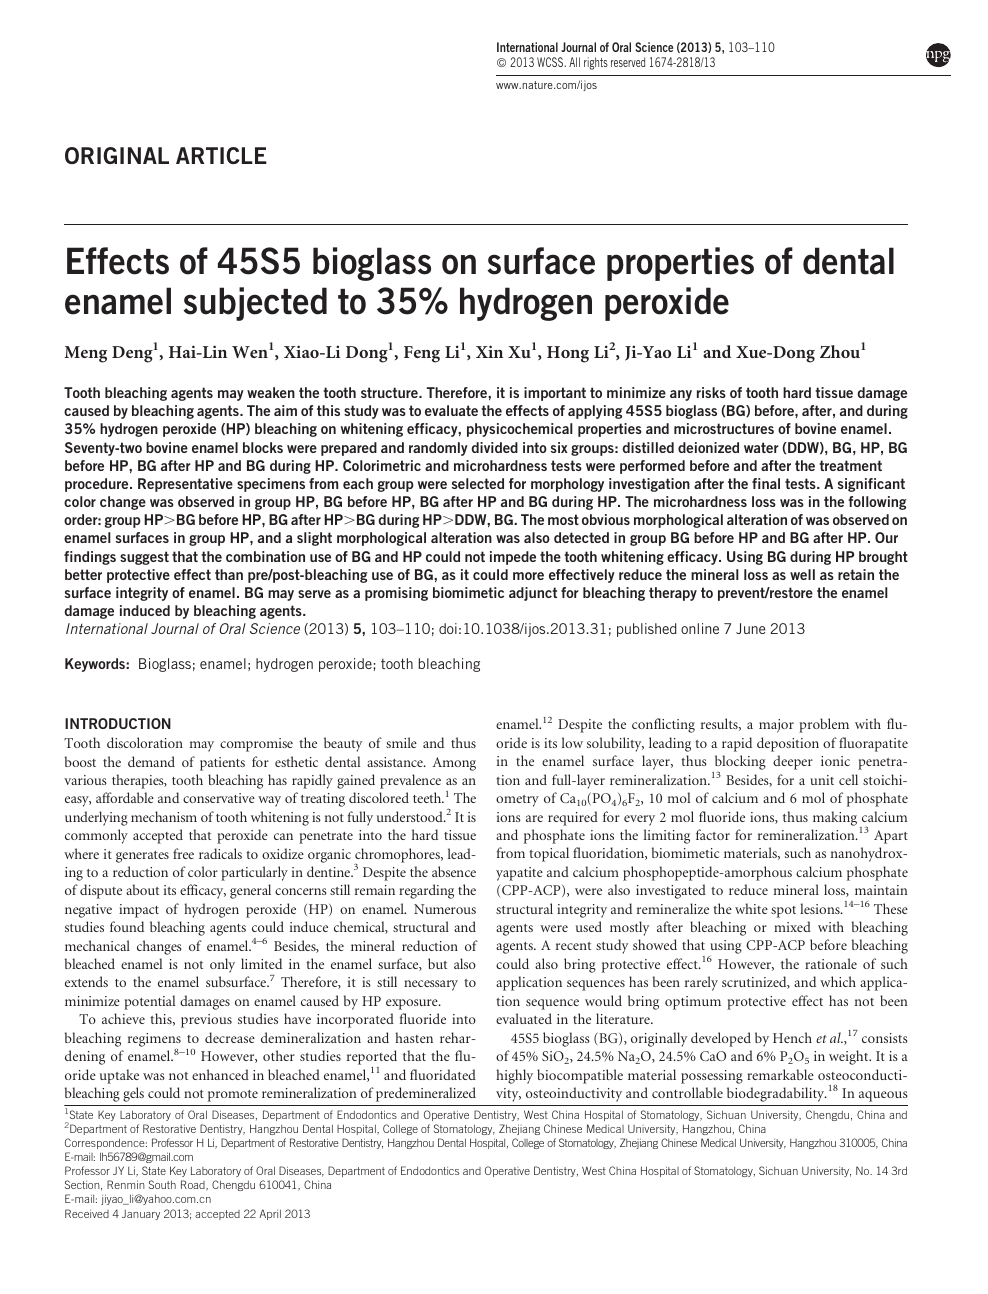 Effects Of 45s5 Bioglass On Surface Properties Of Dental Enamel Subjected To 35 Hydrogen Peroxide Topic Of Research Paper In Medical Engineering Download Scholarly Article Pdf And Read For Free On